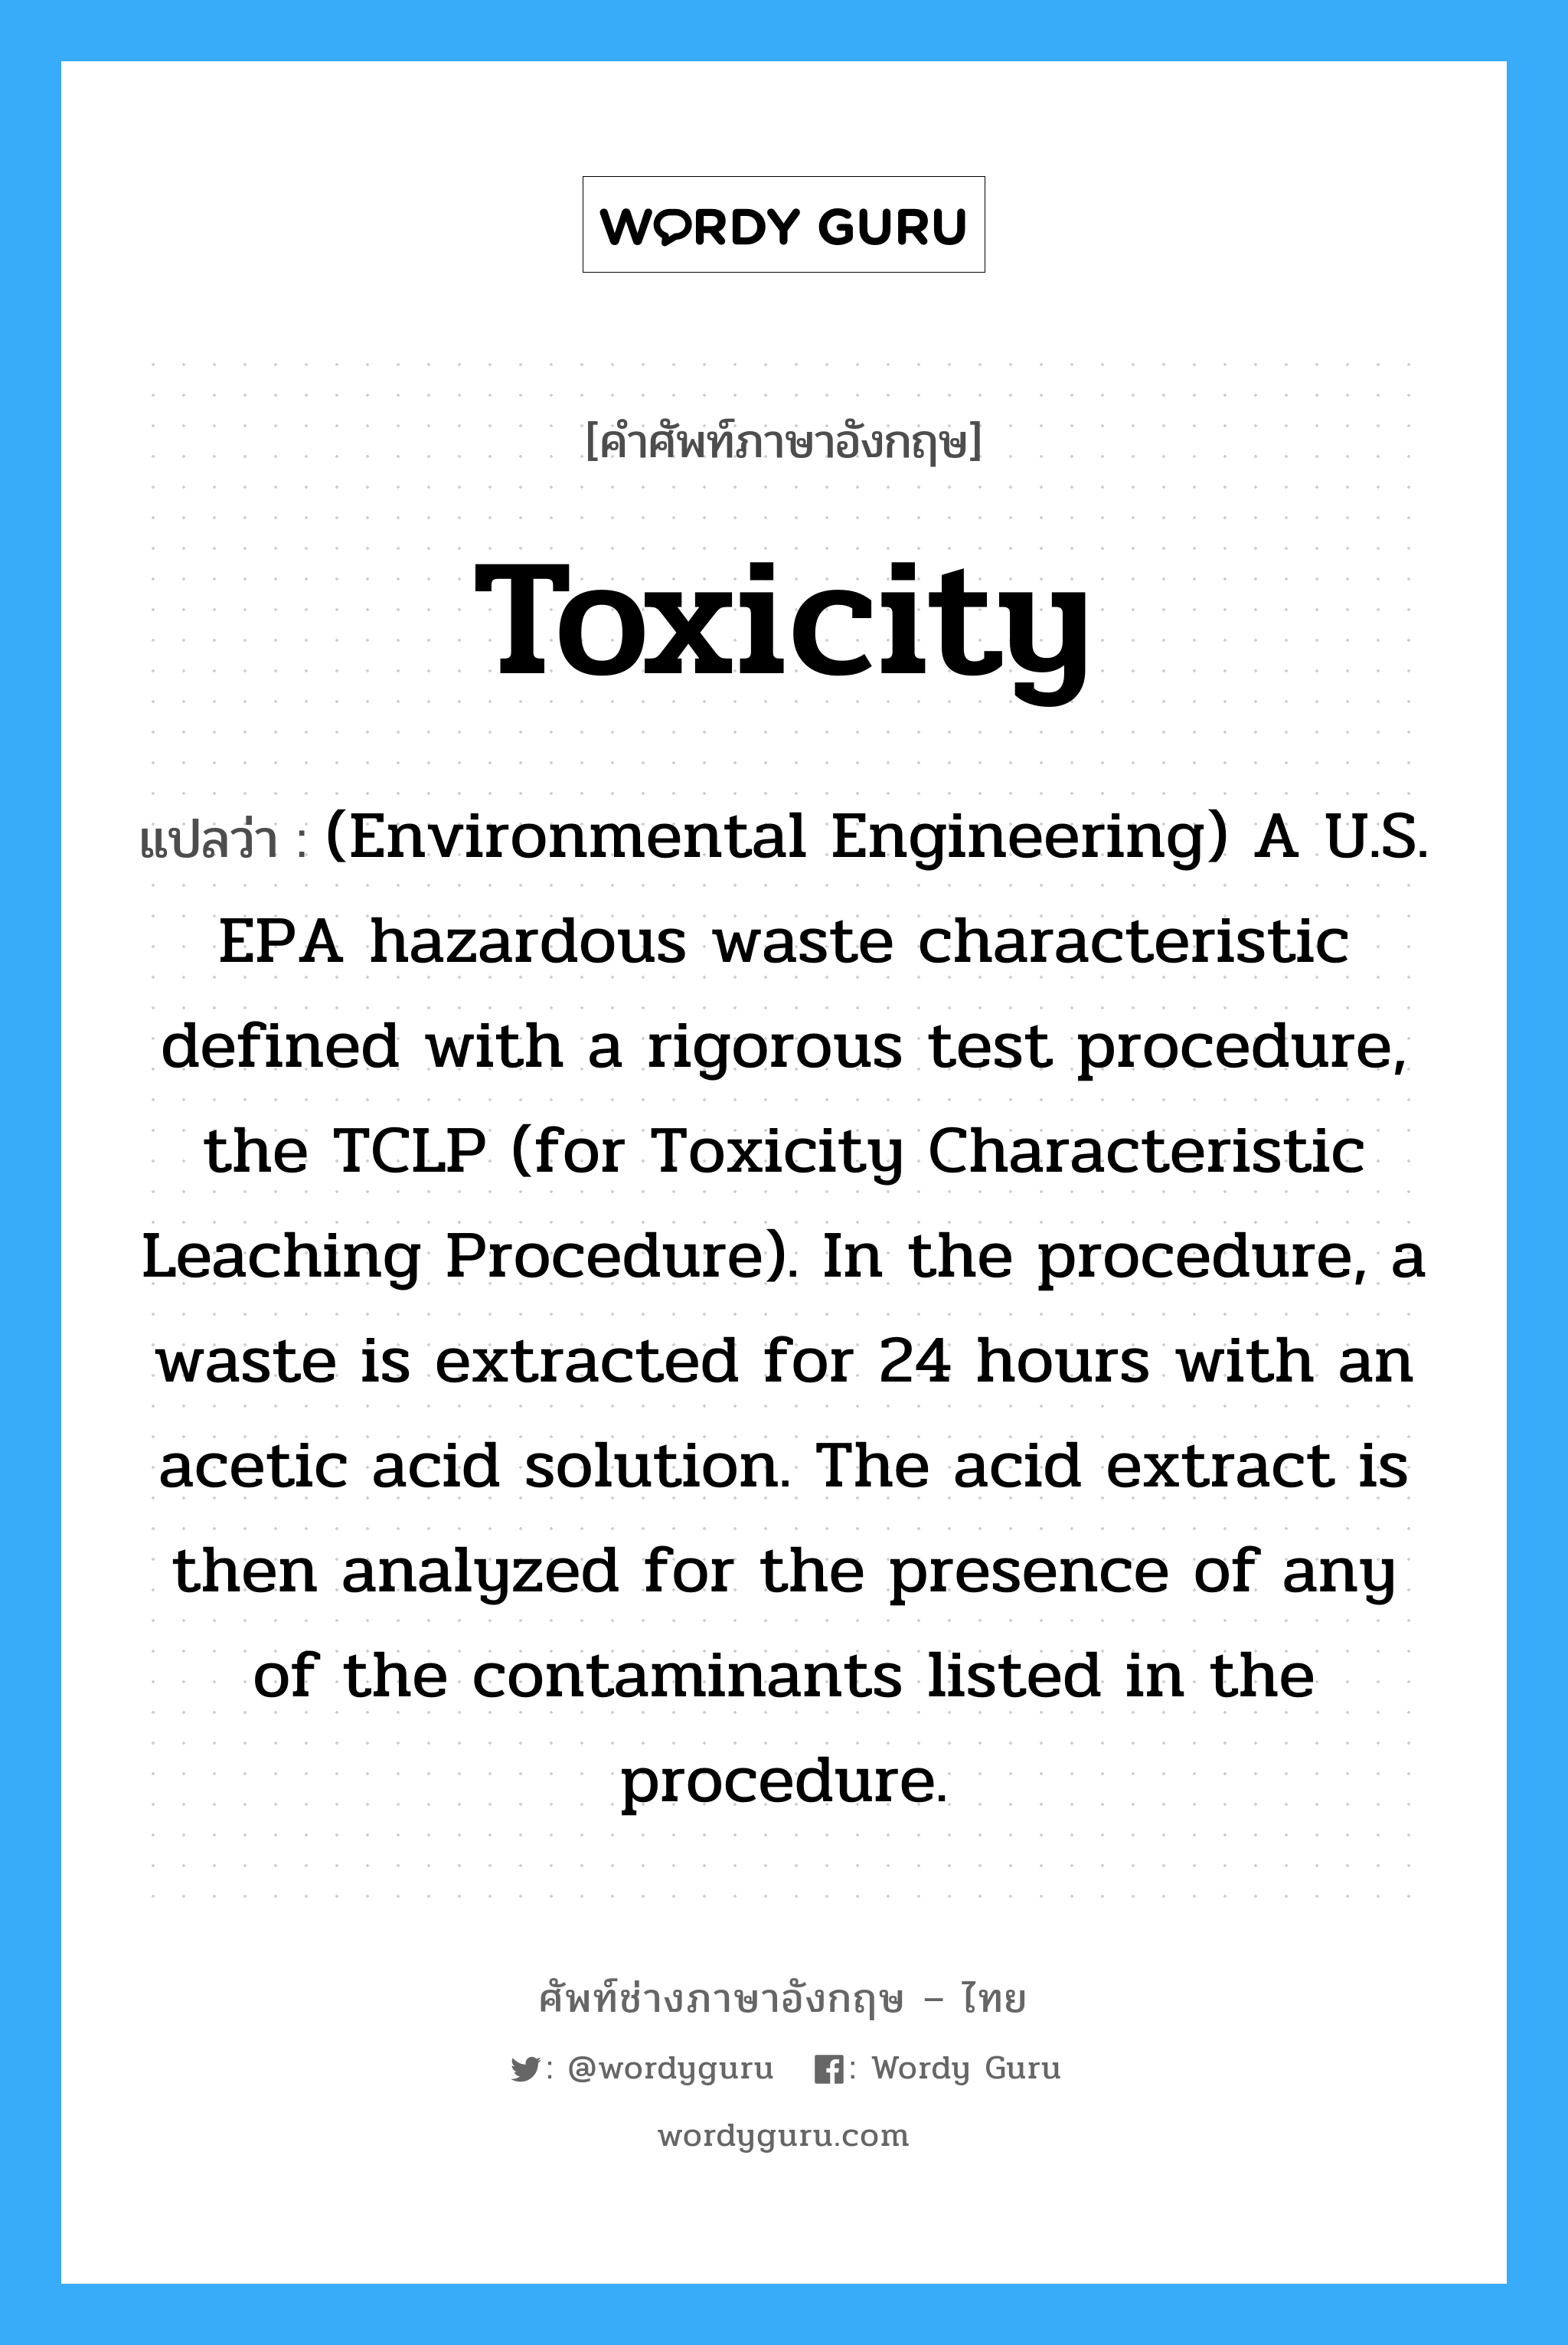 (Environmental Engineering) A U.S. EPA hazardous waste characteristic defined with a rigorous test procedure, the TCLP (for Toxicity Characteristic Leaching Procedure). In the procedure, a waste is extracted for 24 hours with an acetic acid solution. The acid extract is then analyzed for the presence of any of the contaminants listed in the procedure. ภาษาอังกฤษ?, คำศัพท์ช่างภาษาอังกฤษ - ไทย (Environmental Engineering) A U.S. EPA hazardous waste characteristic defined with a rigorous test procedure, the TCLP (for Toxicity Characteristic Leaching Procedure). In the procedure, a waste is extracted for 24 hours with an acetic acid solution. The acid extract is then analyzed for the presence of any of the contaminants listed in the procedure. คำศัพท์ภาษาอังกฤษ (Environmental Engineering) A U.S. EPA hazardous waste characteristic defined with a rigorous test procedure, the TCLP (for Toxicity Characteristic Leaching Procedure). In the procedure, a waste is extracted for 24 hours with an acetic acid solution. The acid extract is then analyzed for the presence of any of the contaminants listed in the procedure. แปลว่า Toxicity